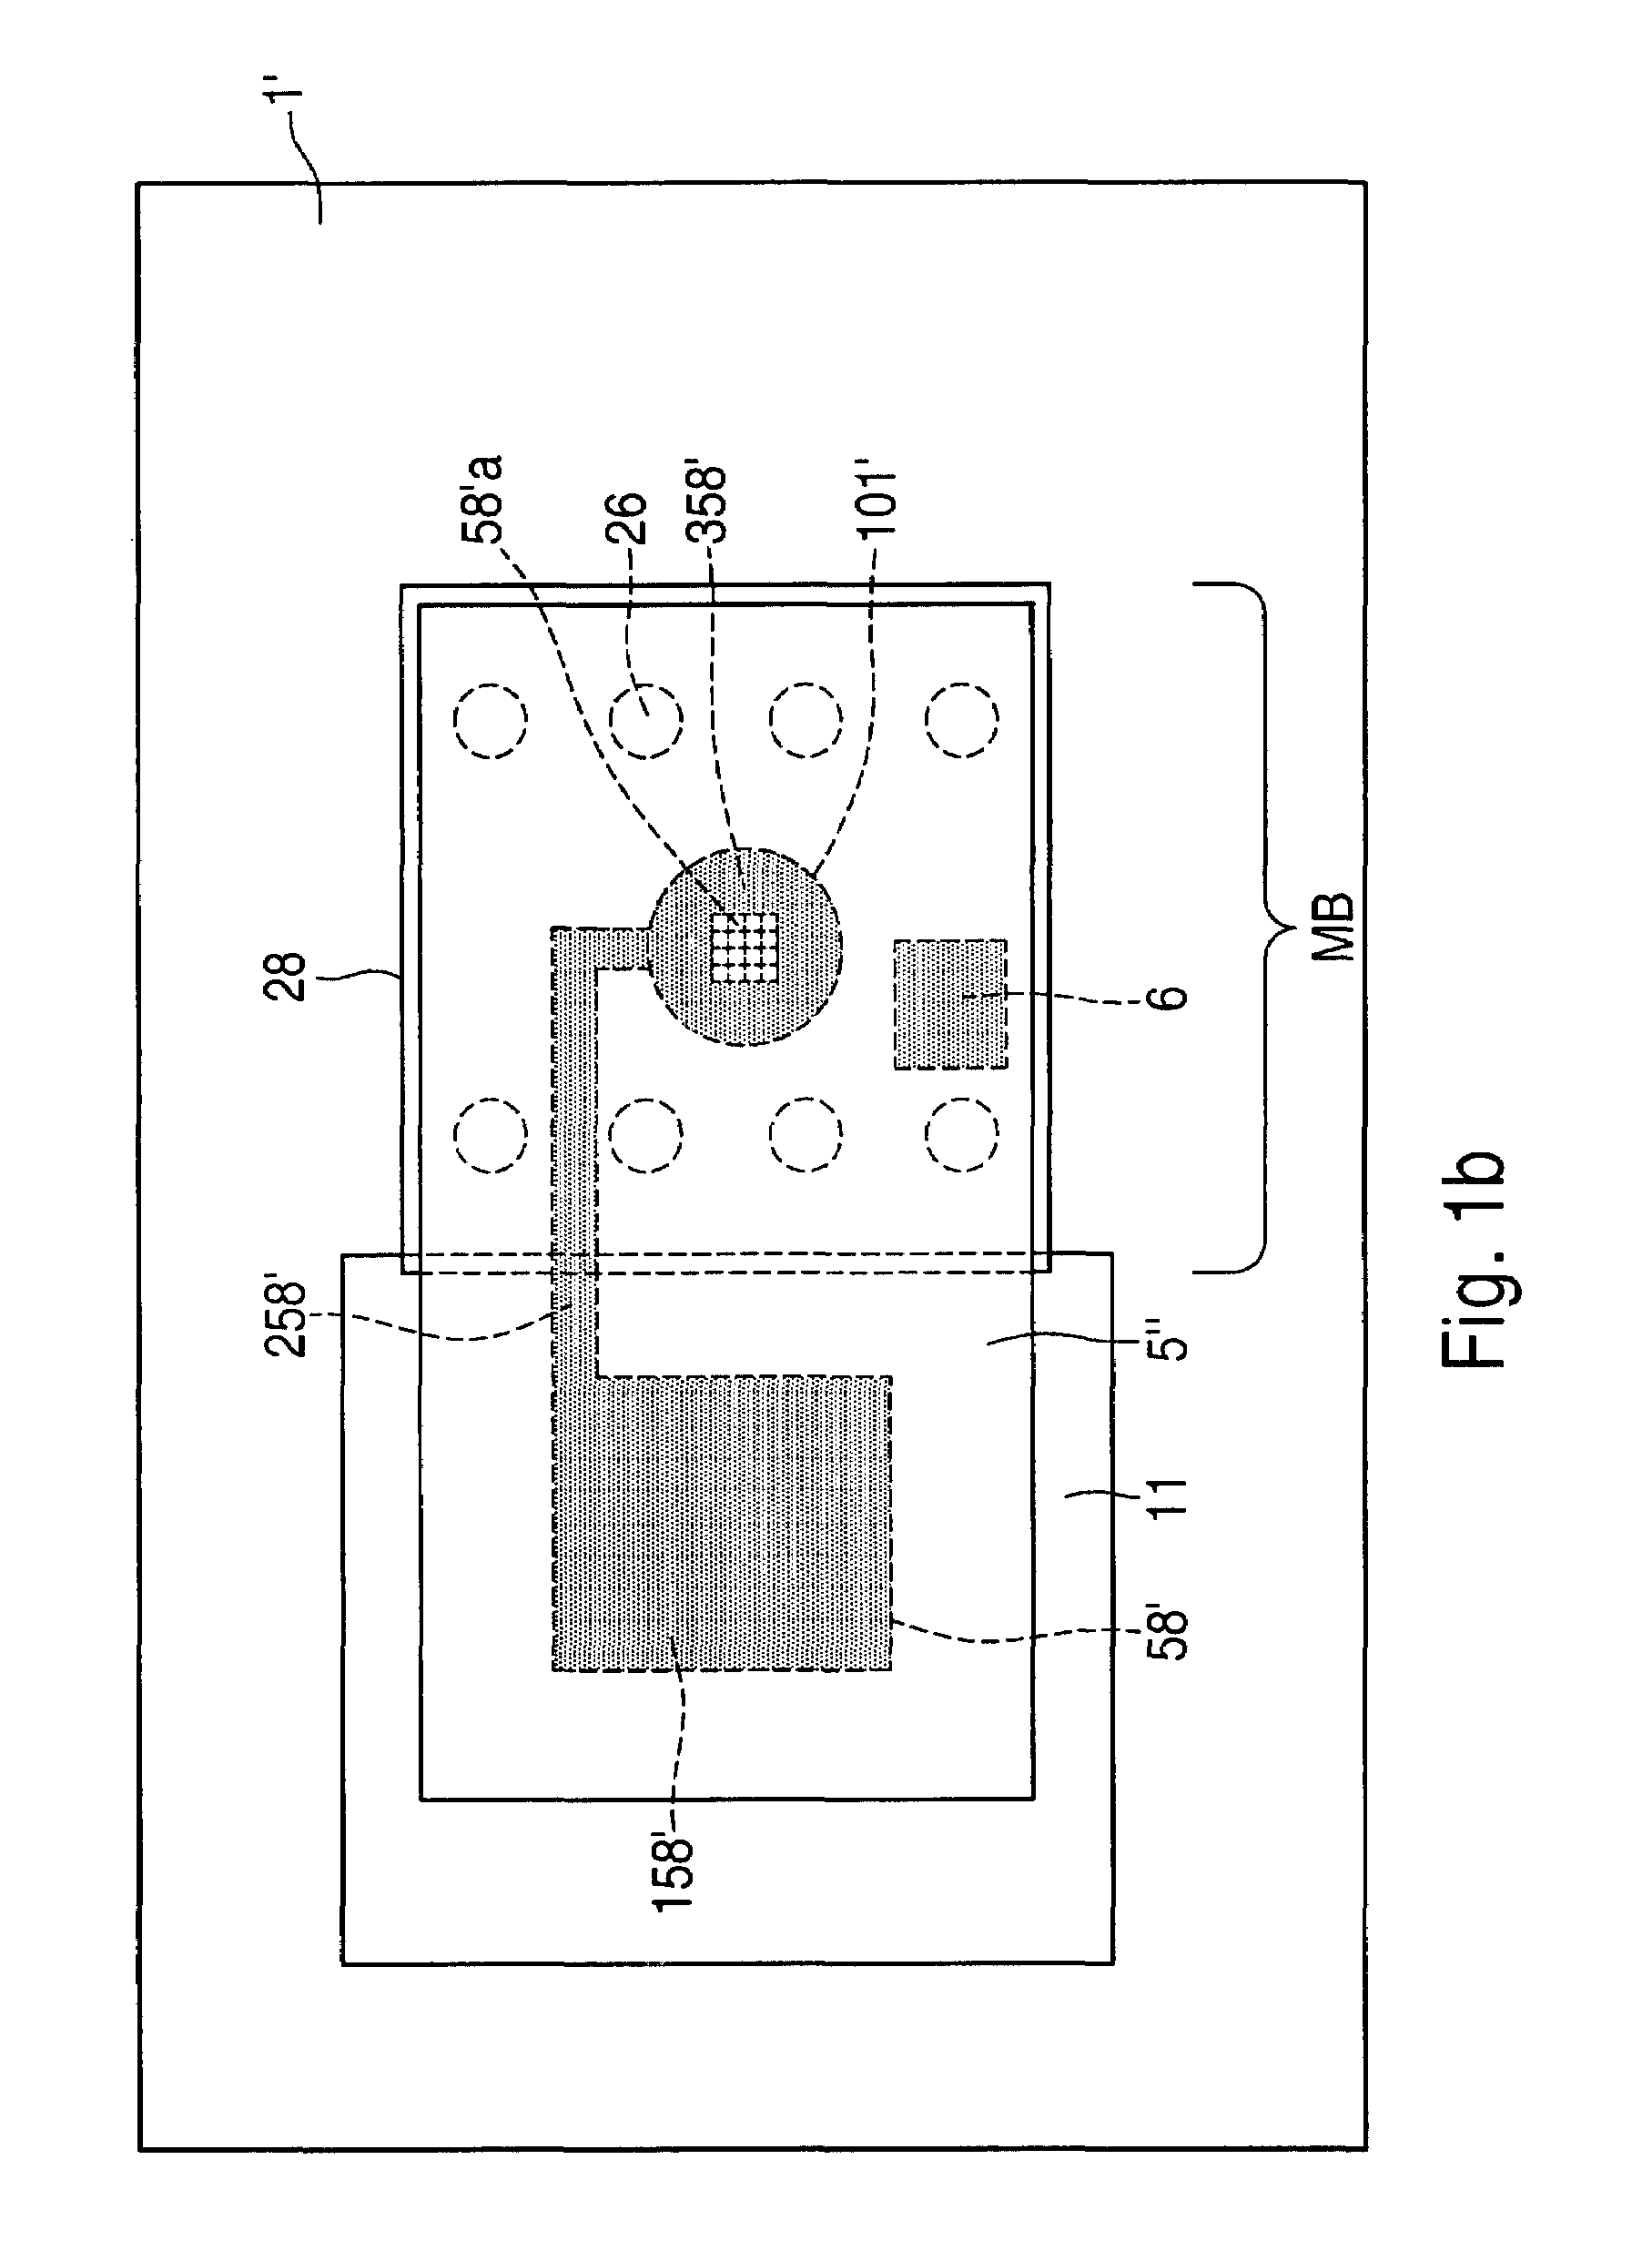 Method for mounting semiconductor chips, and corresponding semiconductor chip system